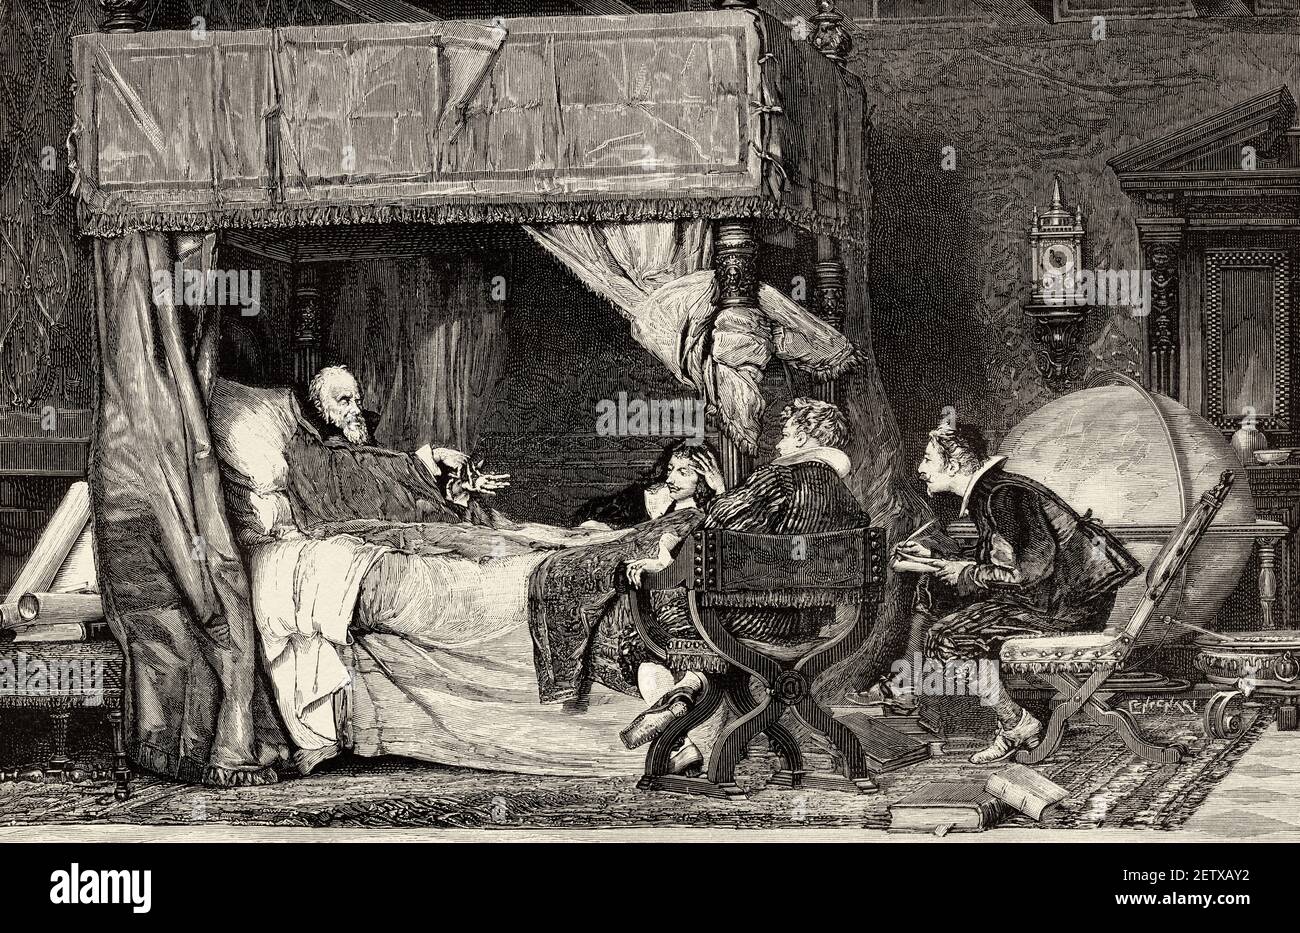 Galileo Galilei (1564-1642) in Arcetri, old Italian scientist  giving lesson to the pupils, sitting around his bed, during his confinement, Ancient roman empire. Italy, Europe. Old 19th century engraved illustration, El Mundo Ilustrado 1881 Stock Photo